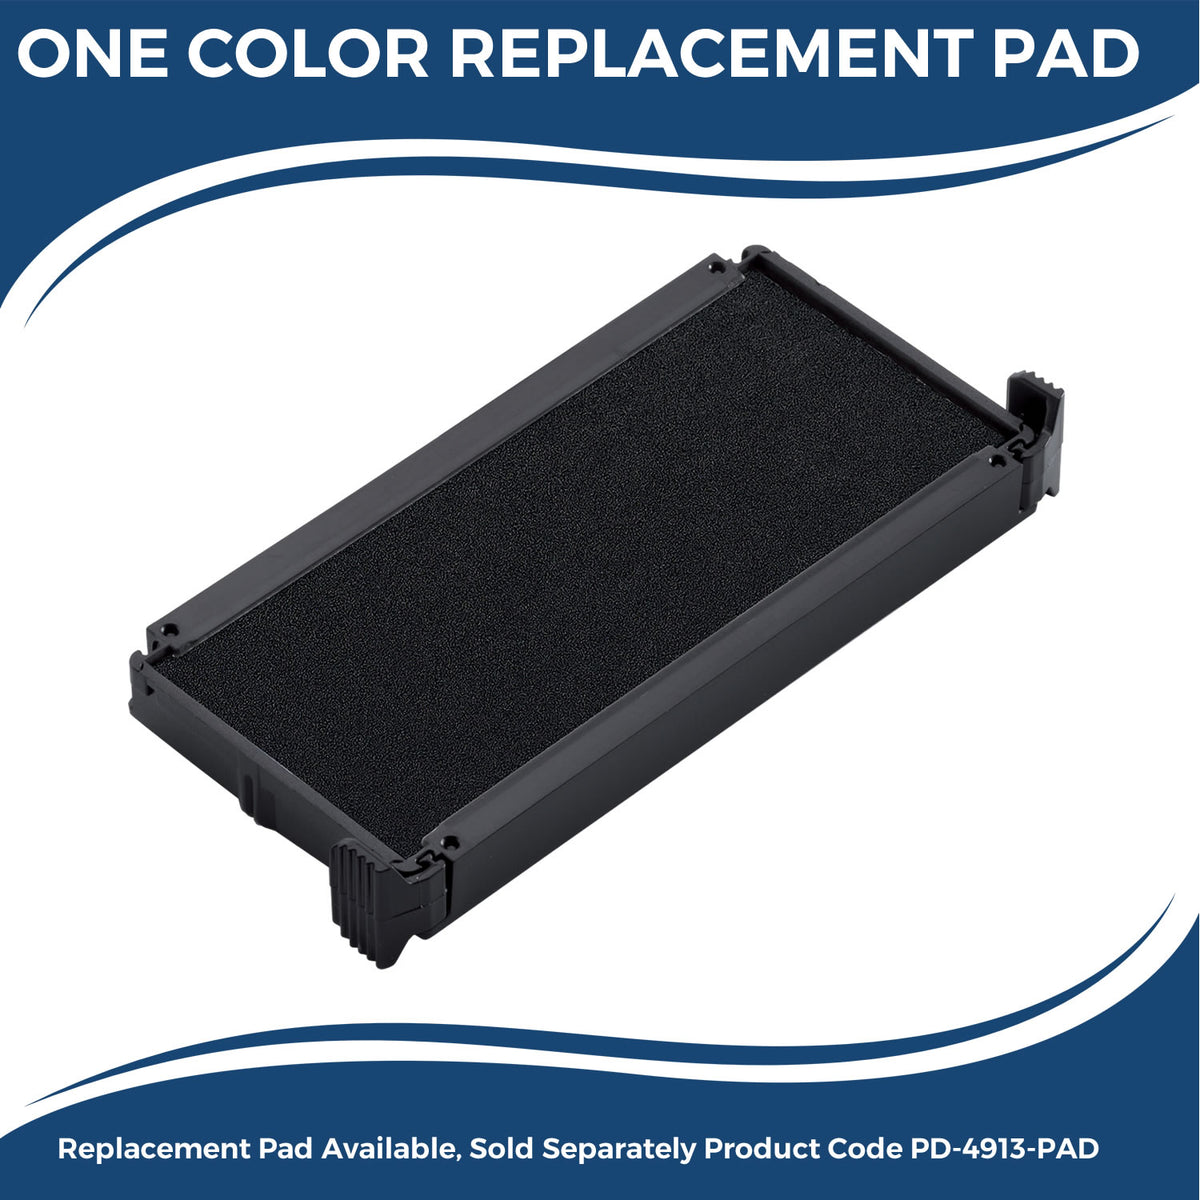 Large Self Inking Atm Stamp 4566S Large Replacment Pad